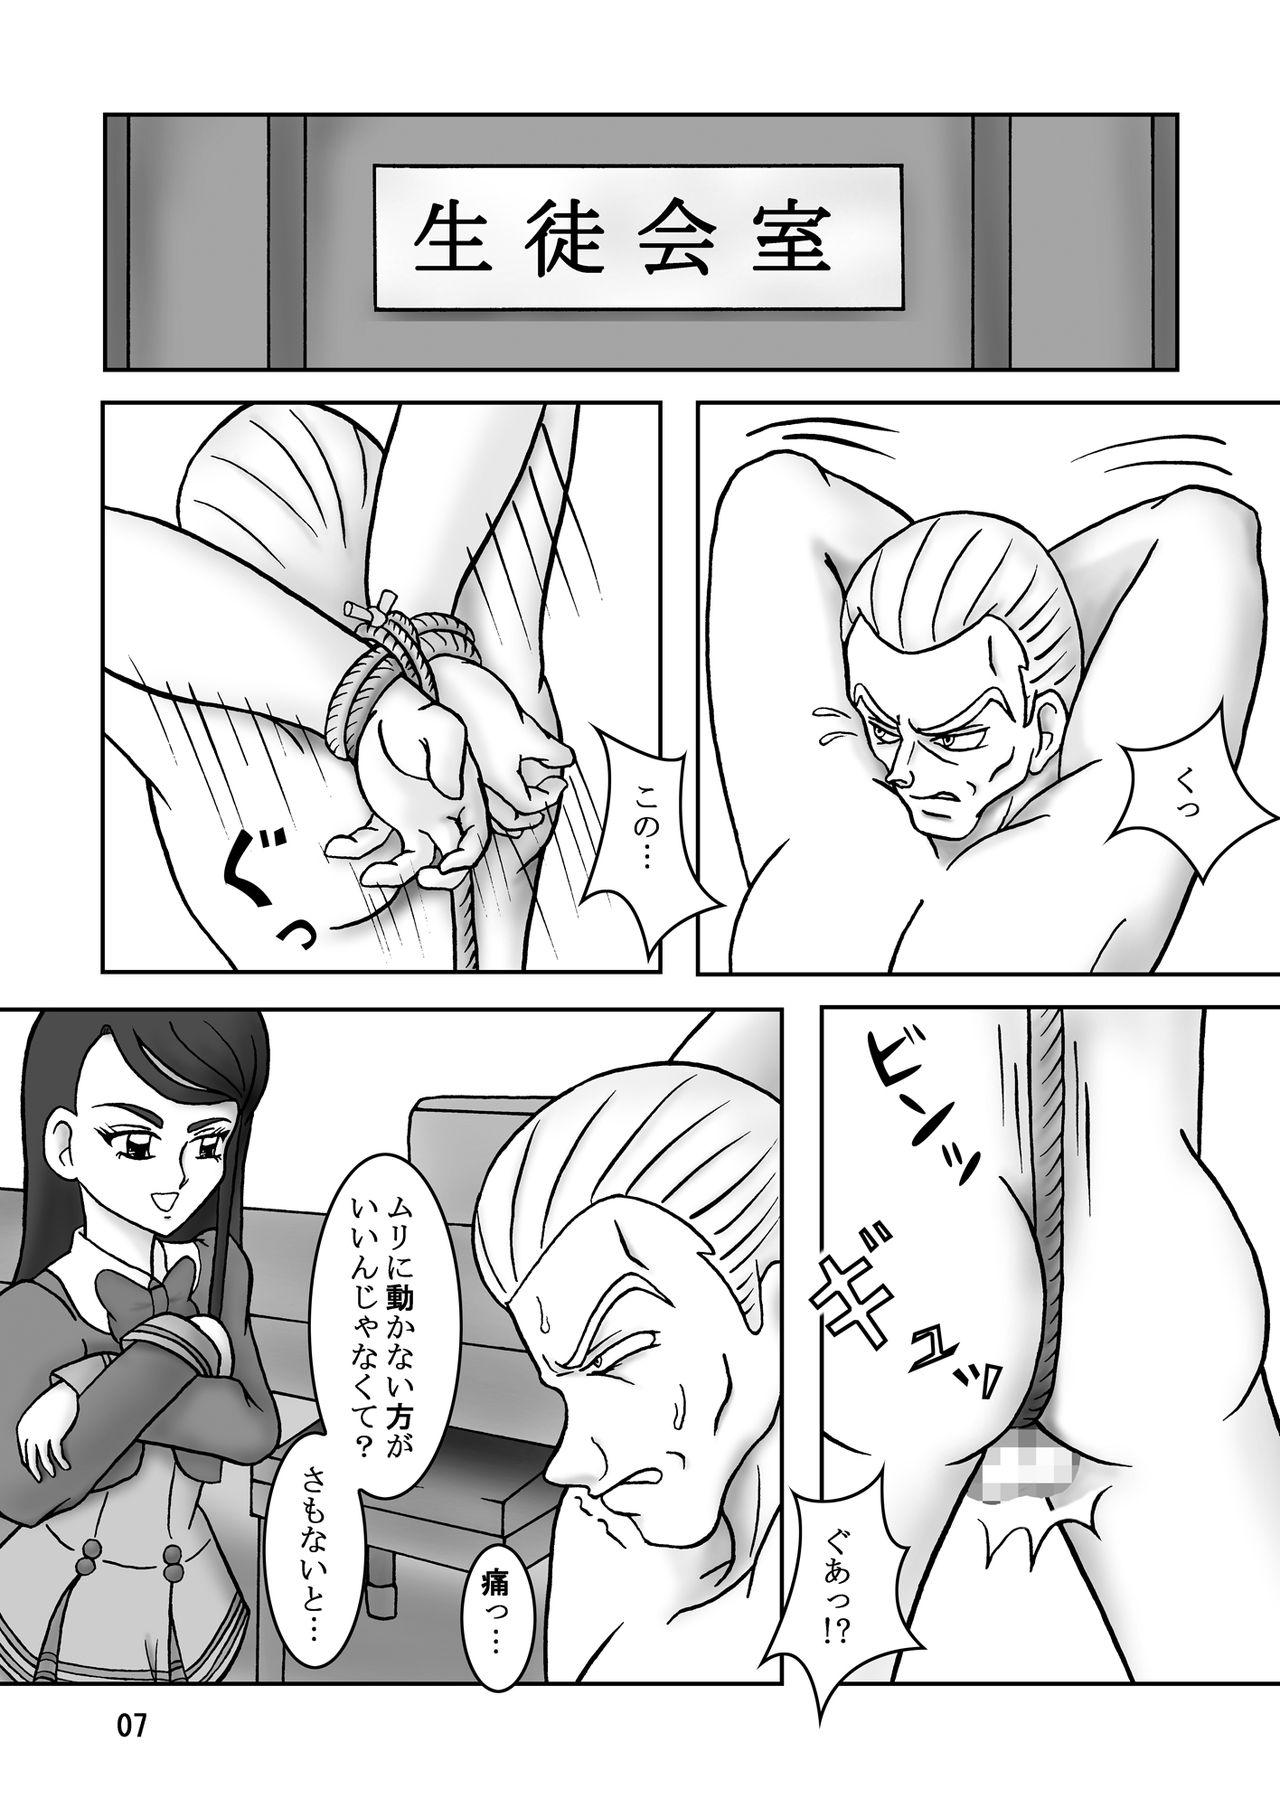 Busty Yes！ズリキュア5 - Yes precure 5 Transvestite - Page 9